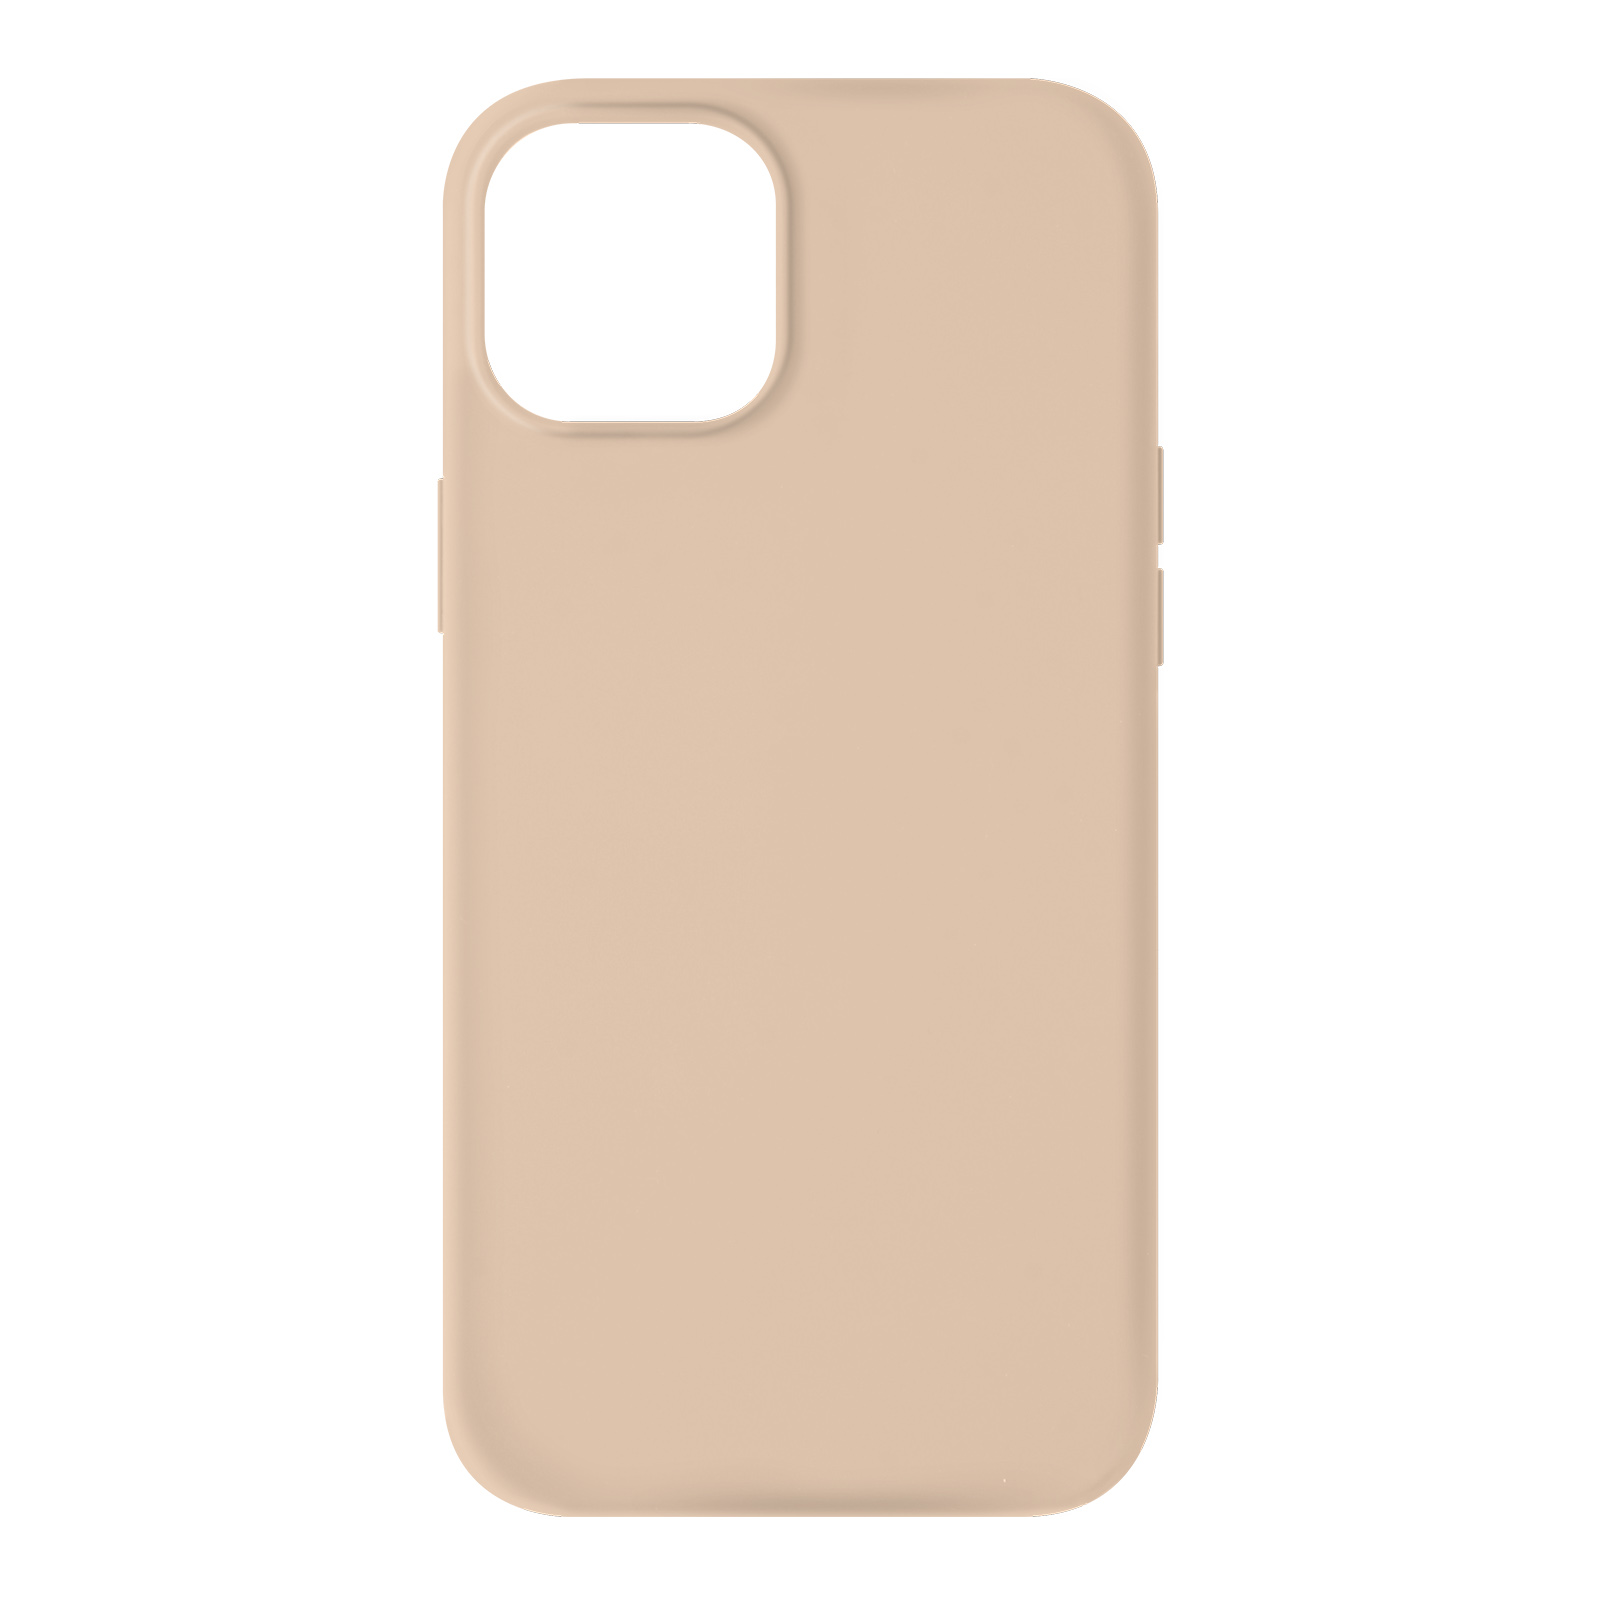 AVIZAR Likid Series, Backcover, Apple, Rosegold iPhone 13